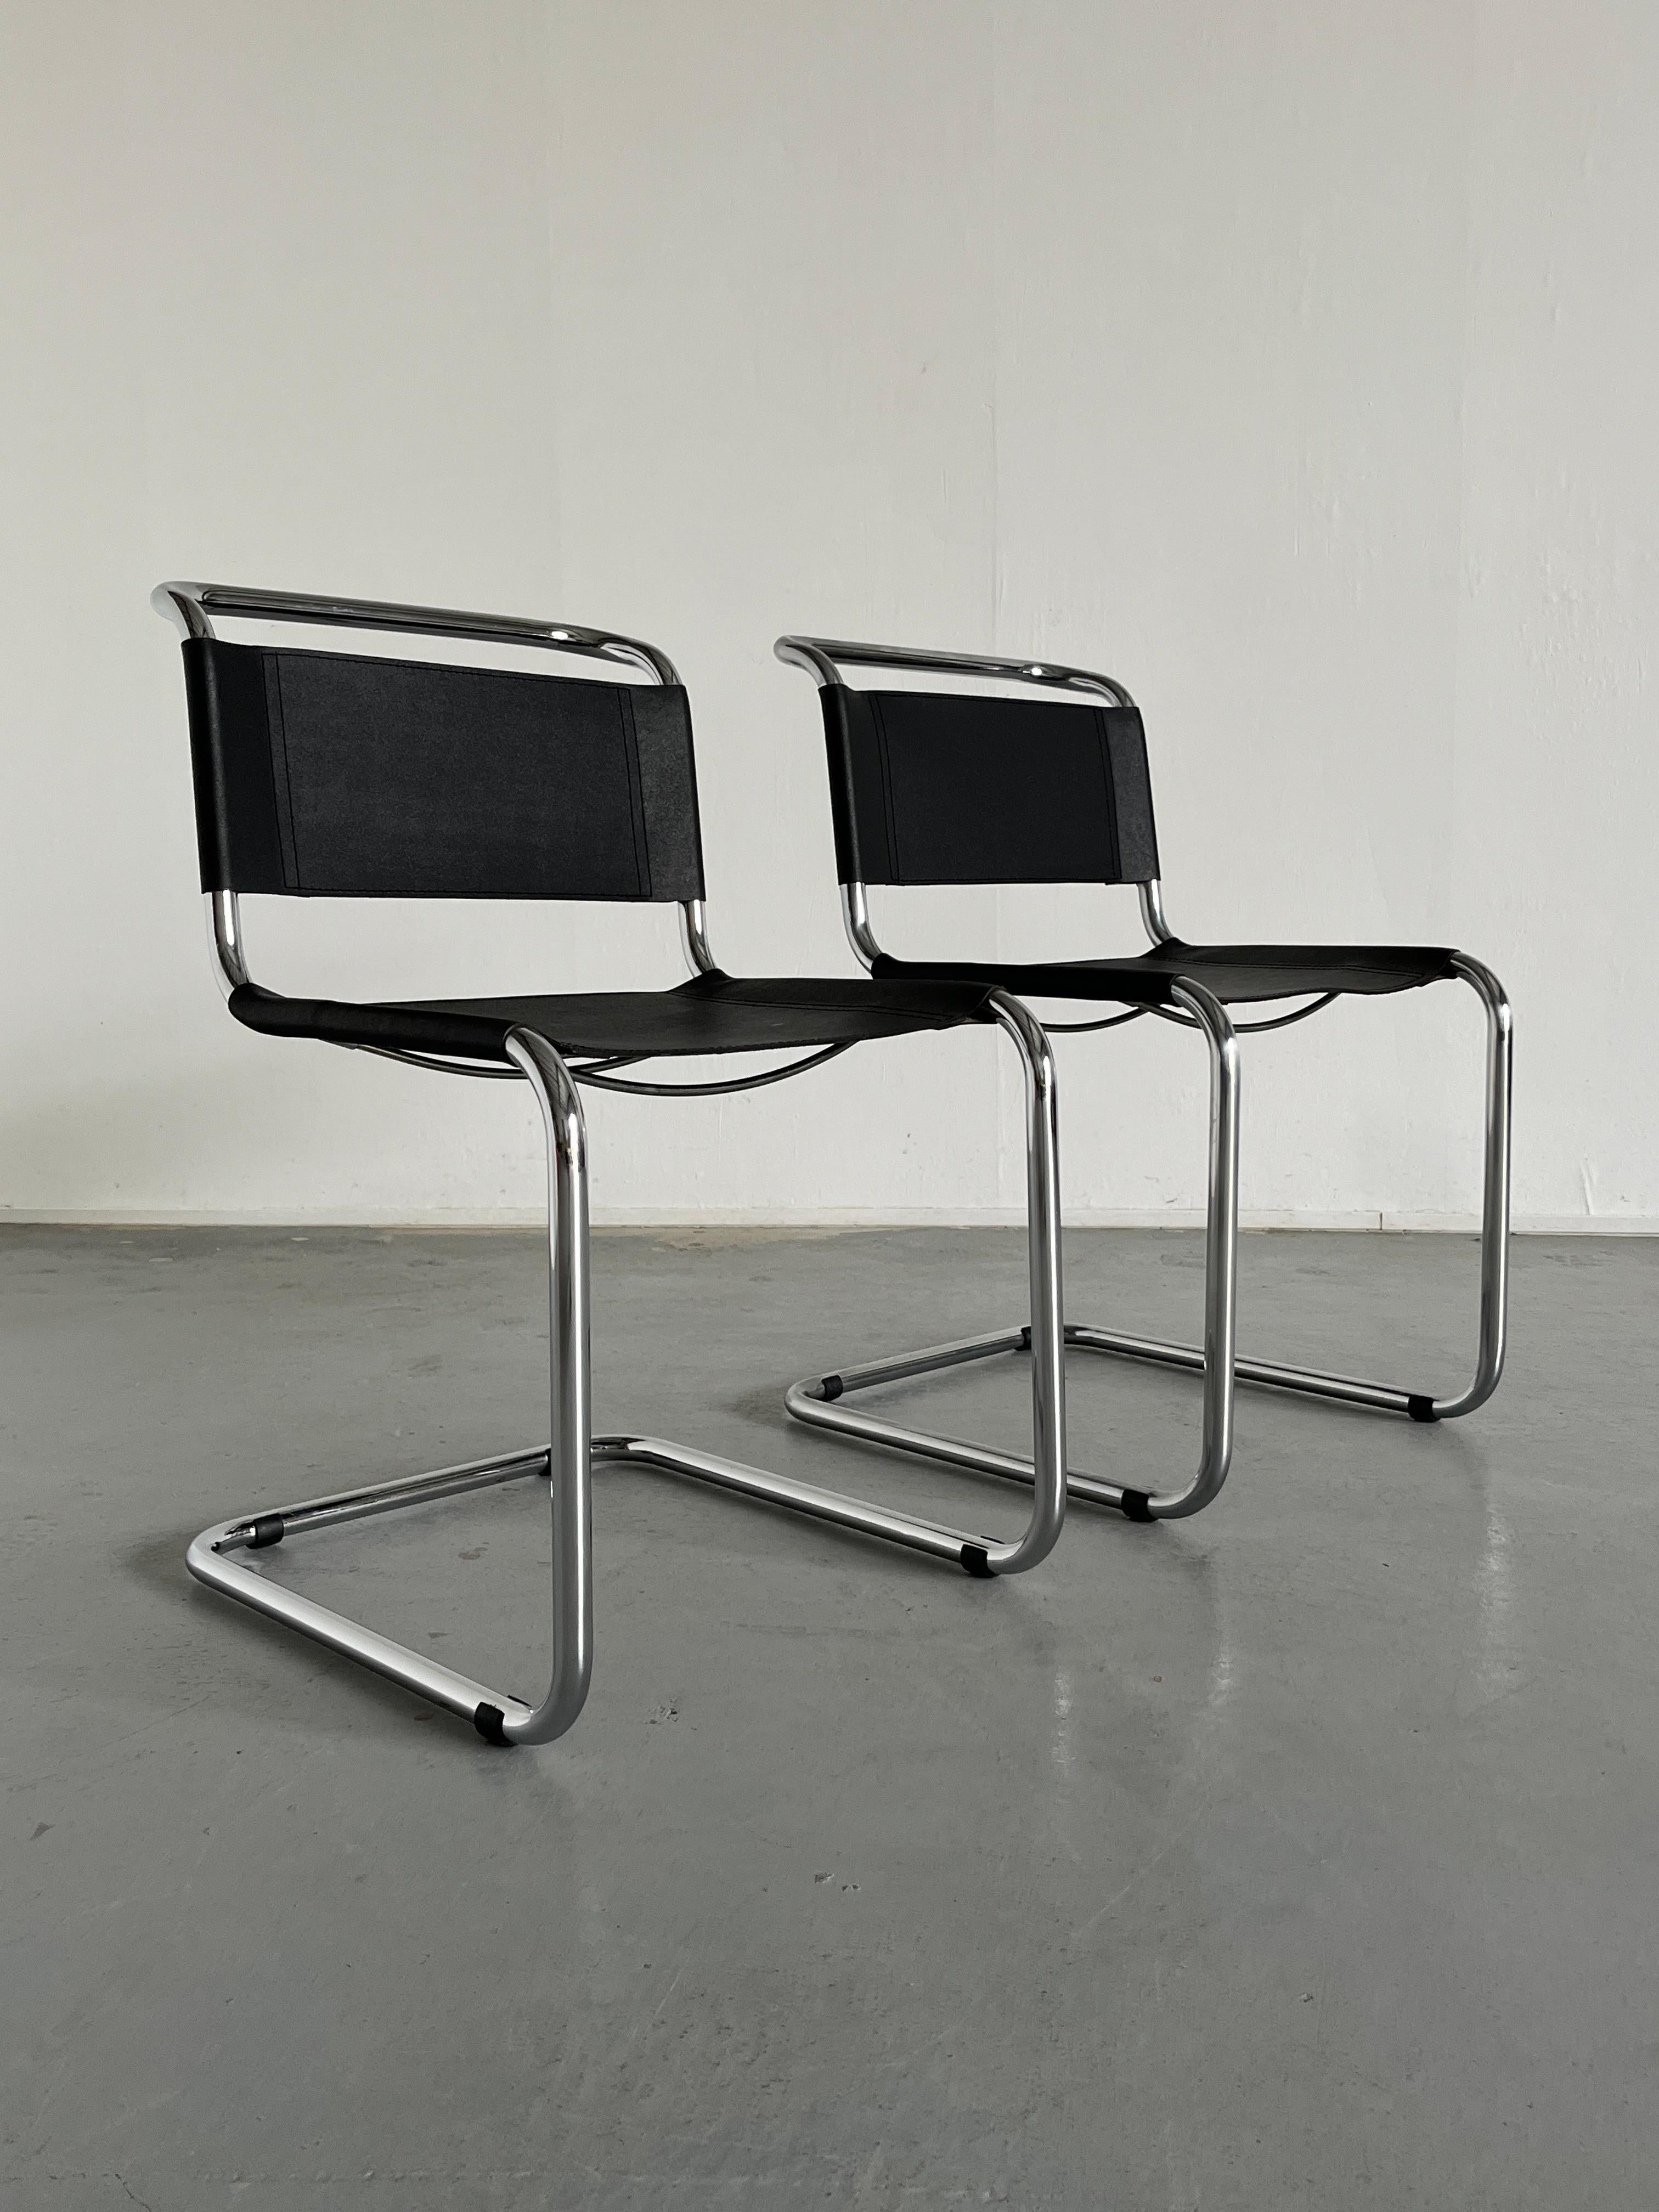 Mart Stam S33 Design Cantilever Tubular Steel and Faux Leather Chairs, 1970s For Sale 3